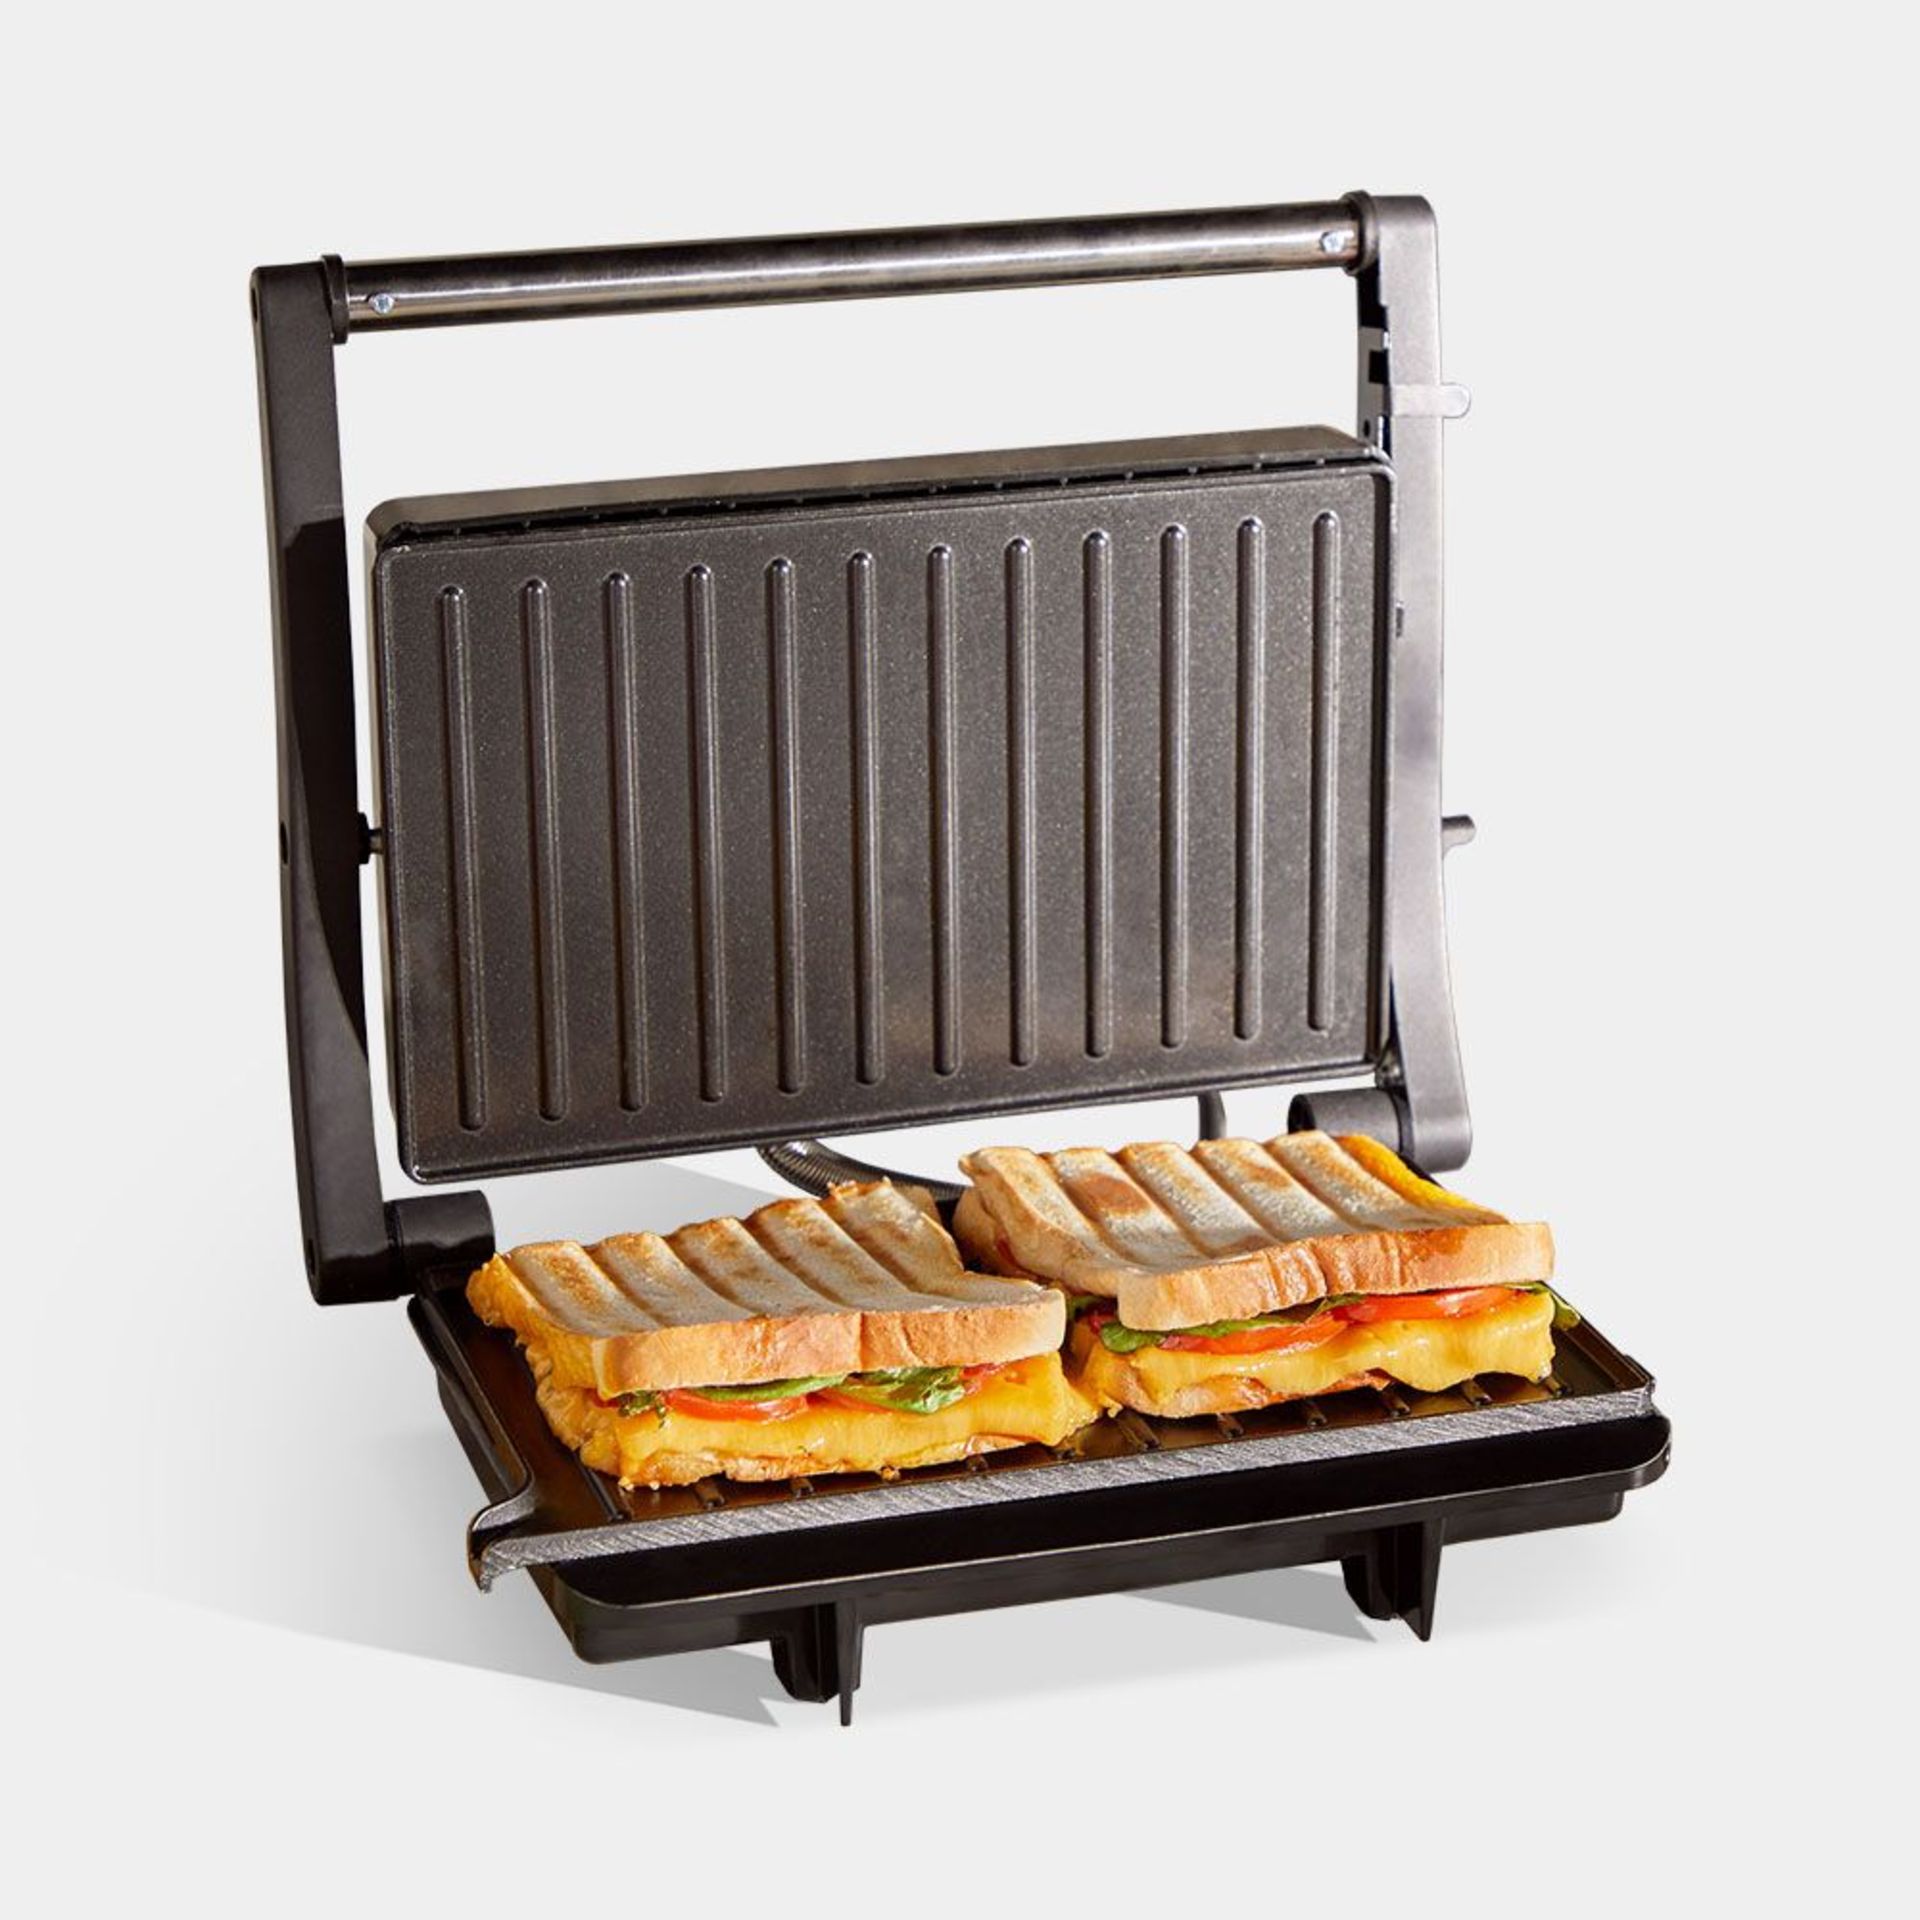 2 Slice Grill. - BI. Featuring power & ready light indicators and a cool-touch safe handle, this